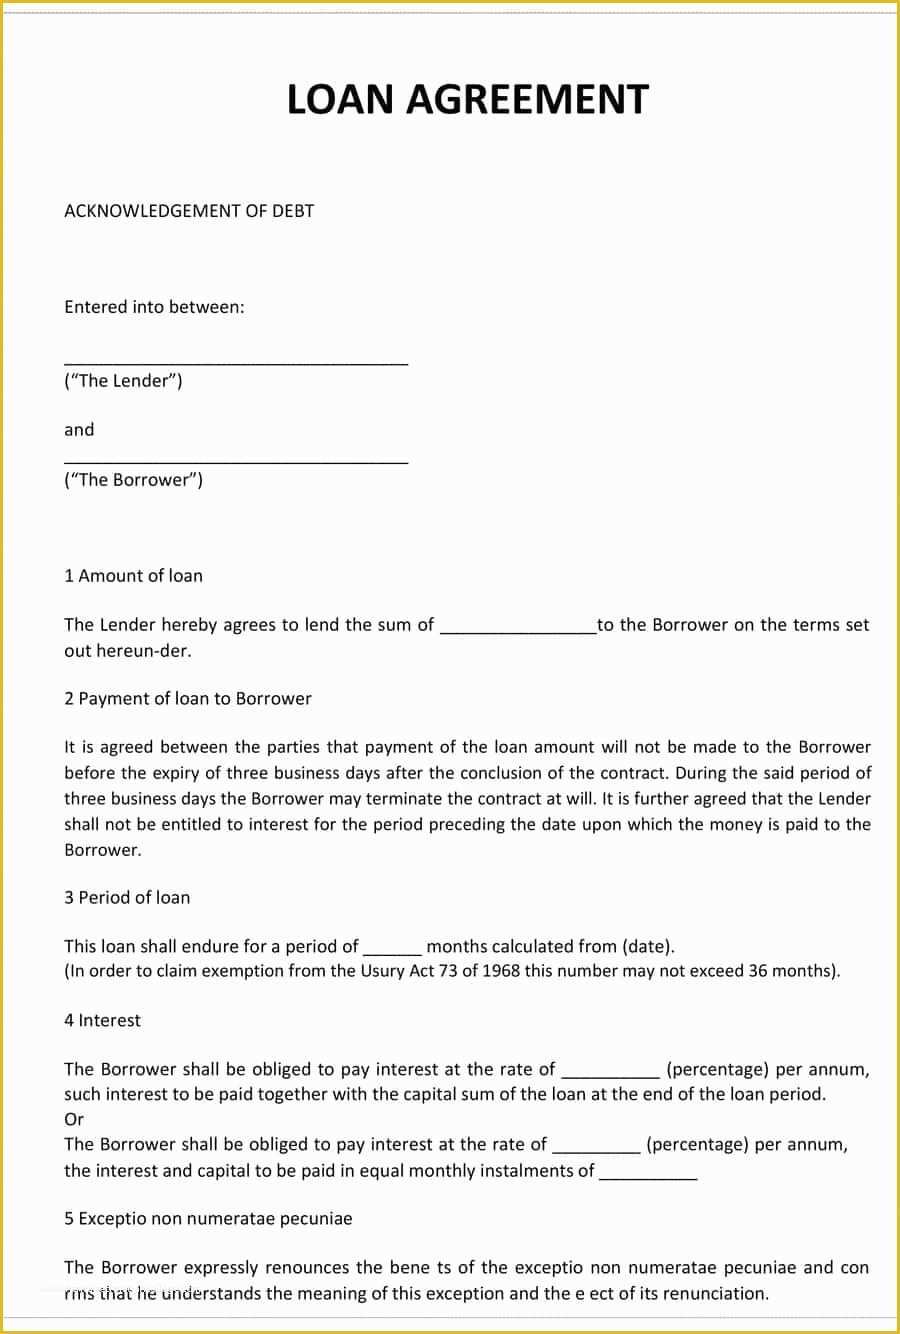 Loan Repayment Contract Free Template Of 40 Free Loan Agreement Templates [word & Pdf] Template Lab